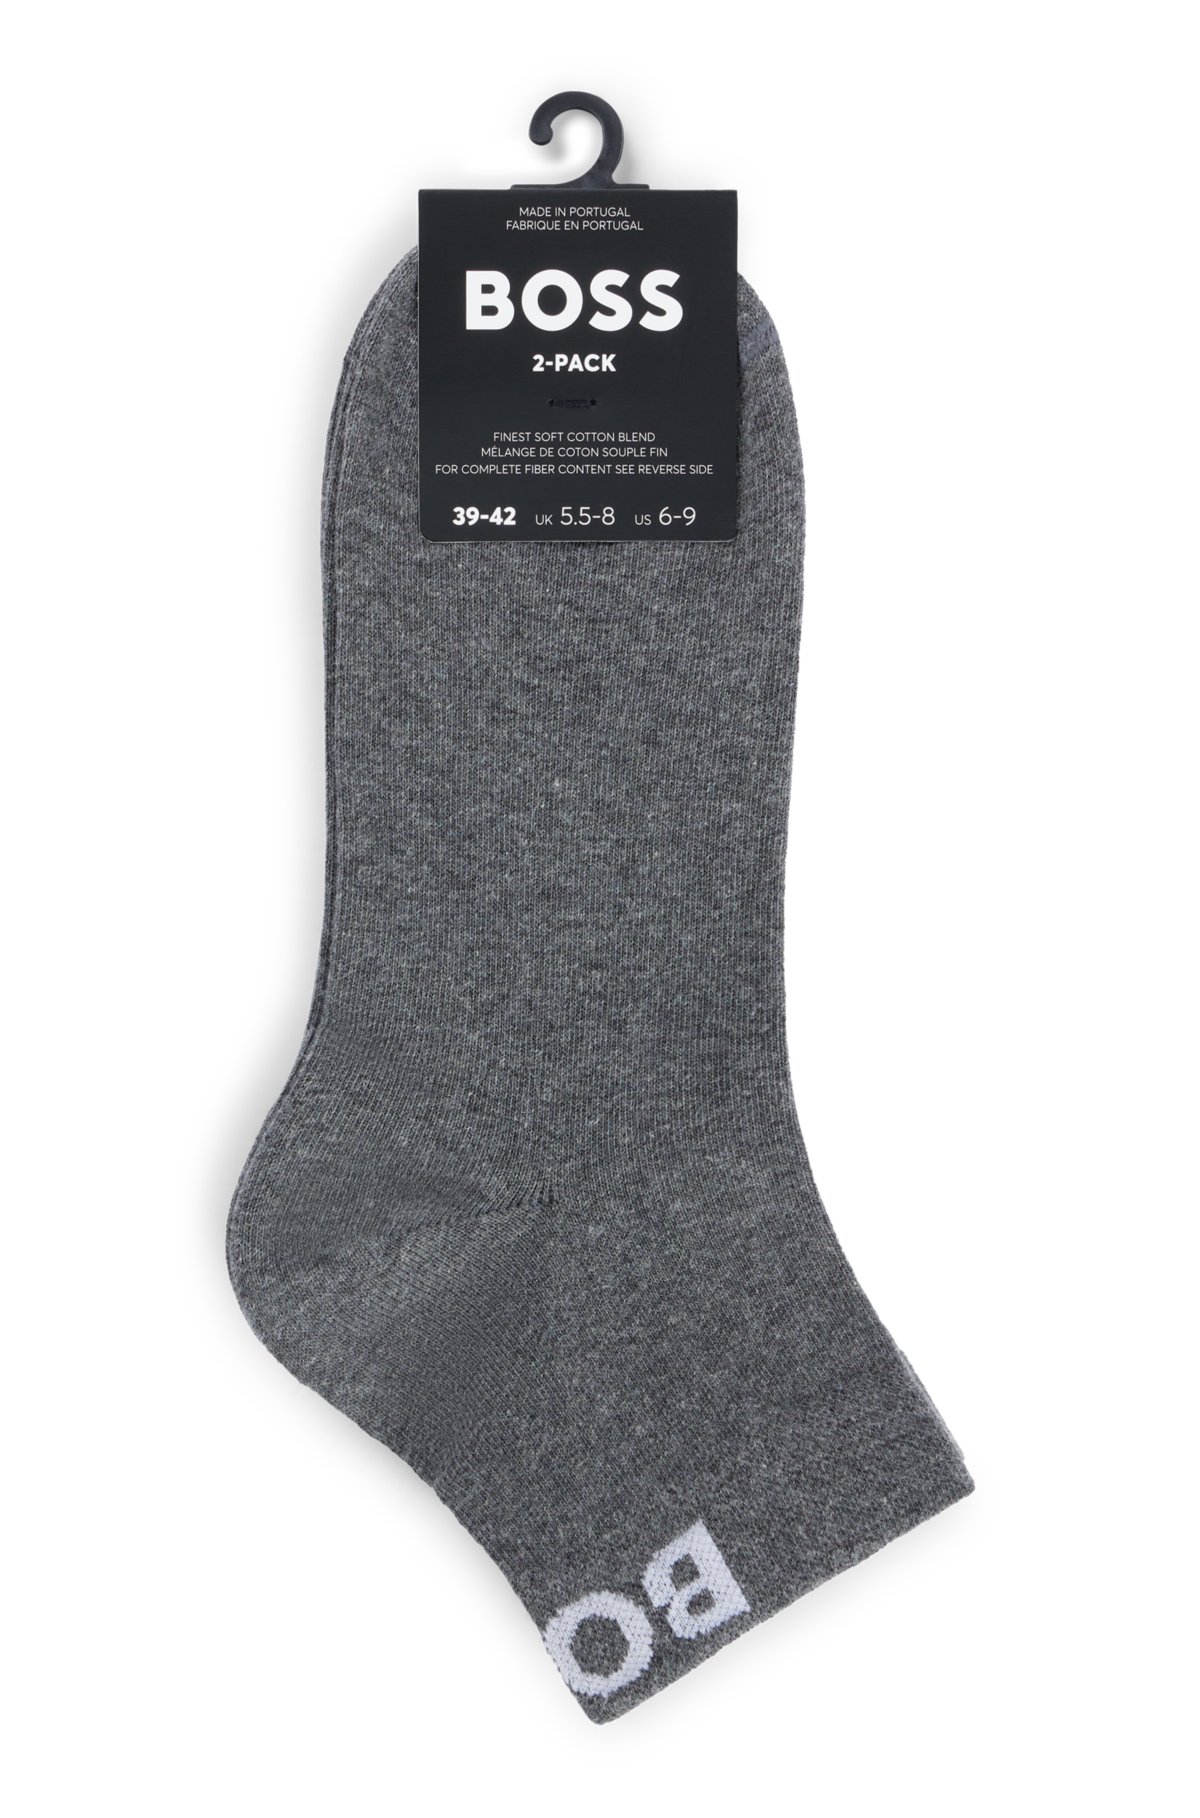 Two-pack of quarter-length socks with contrast logos, Grey